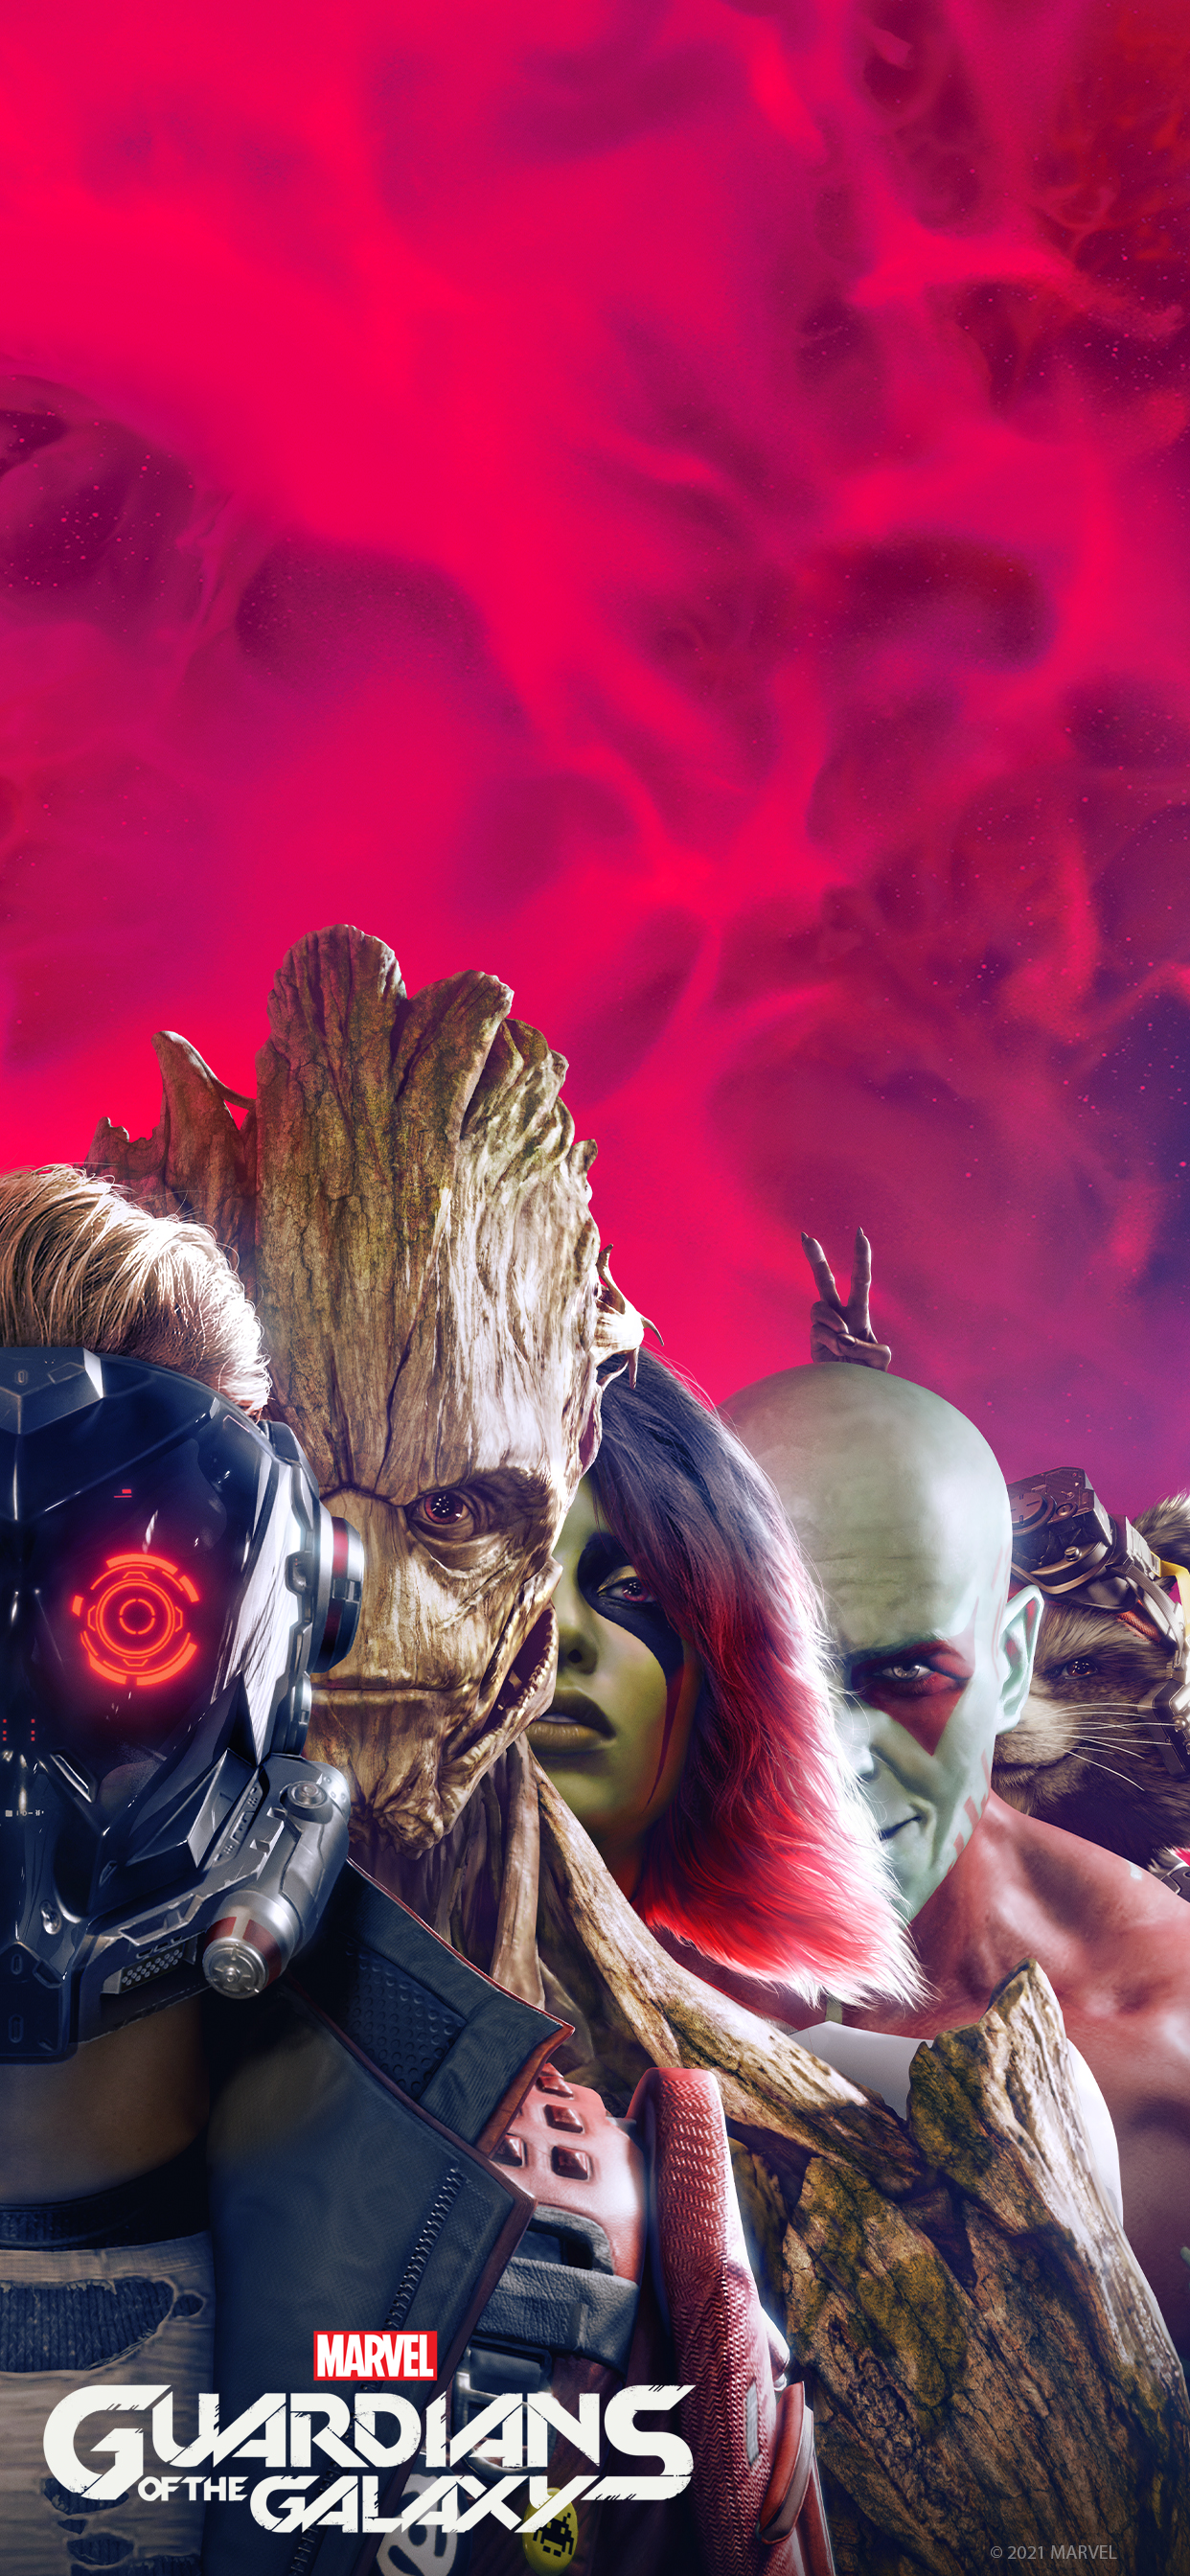 guardians of the galaxy free full movie stream